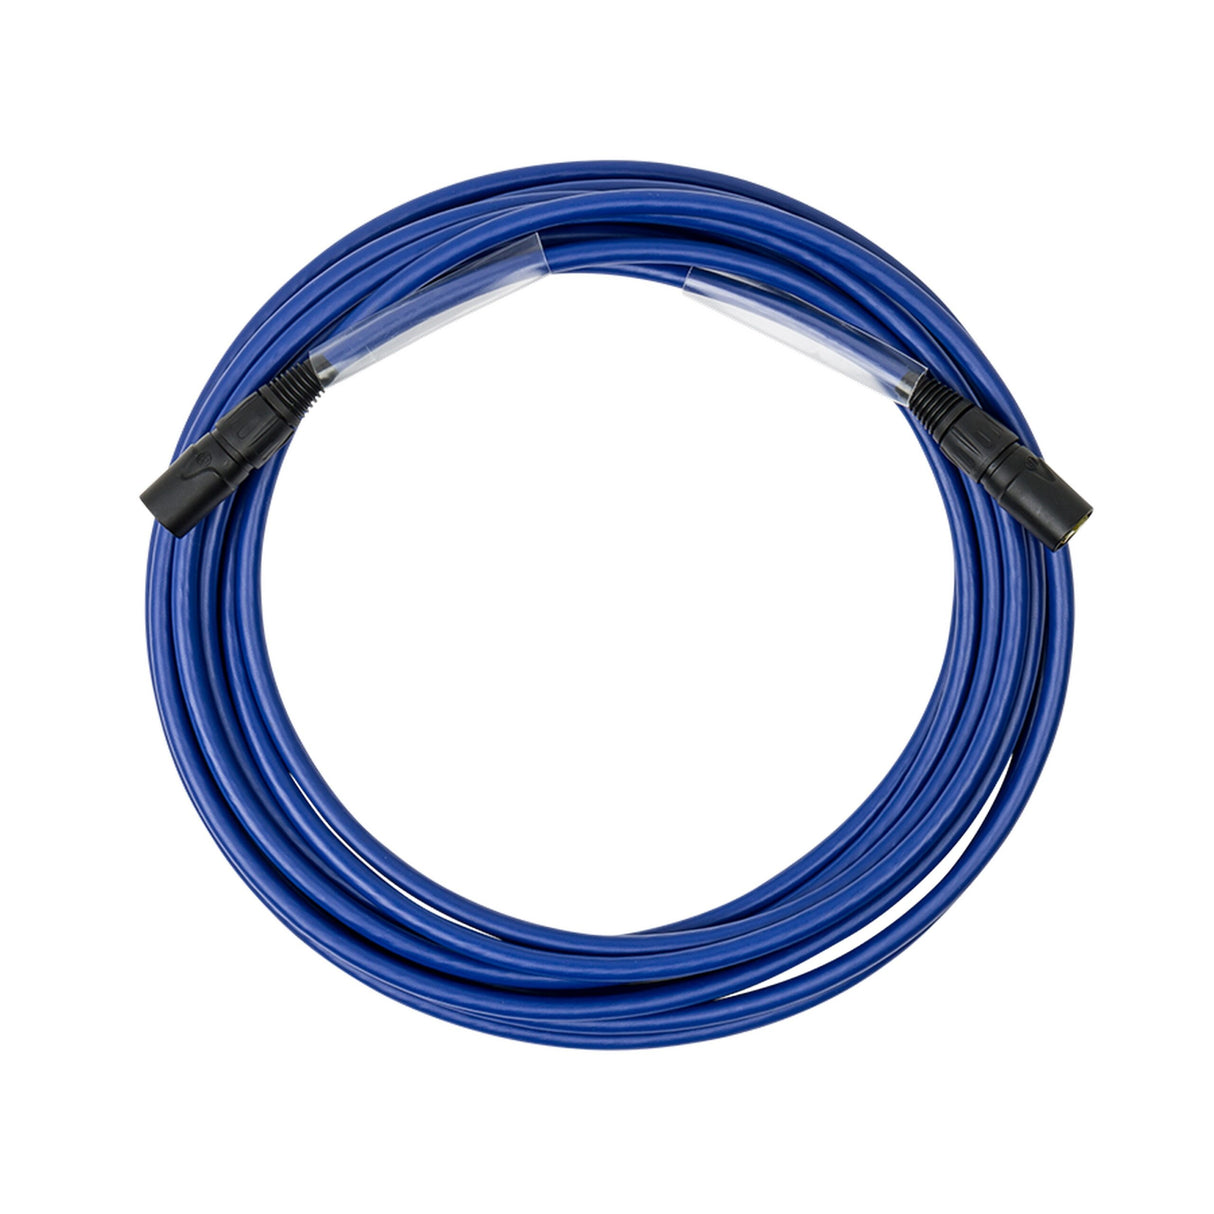 SoundTools SuperCAT Sound etherCON to etherCON CAT5e Cable, Blue, 15 Meter